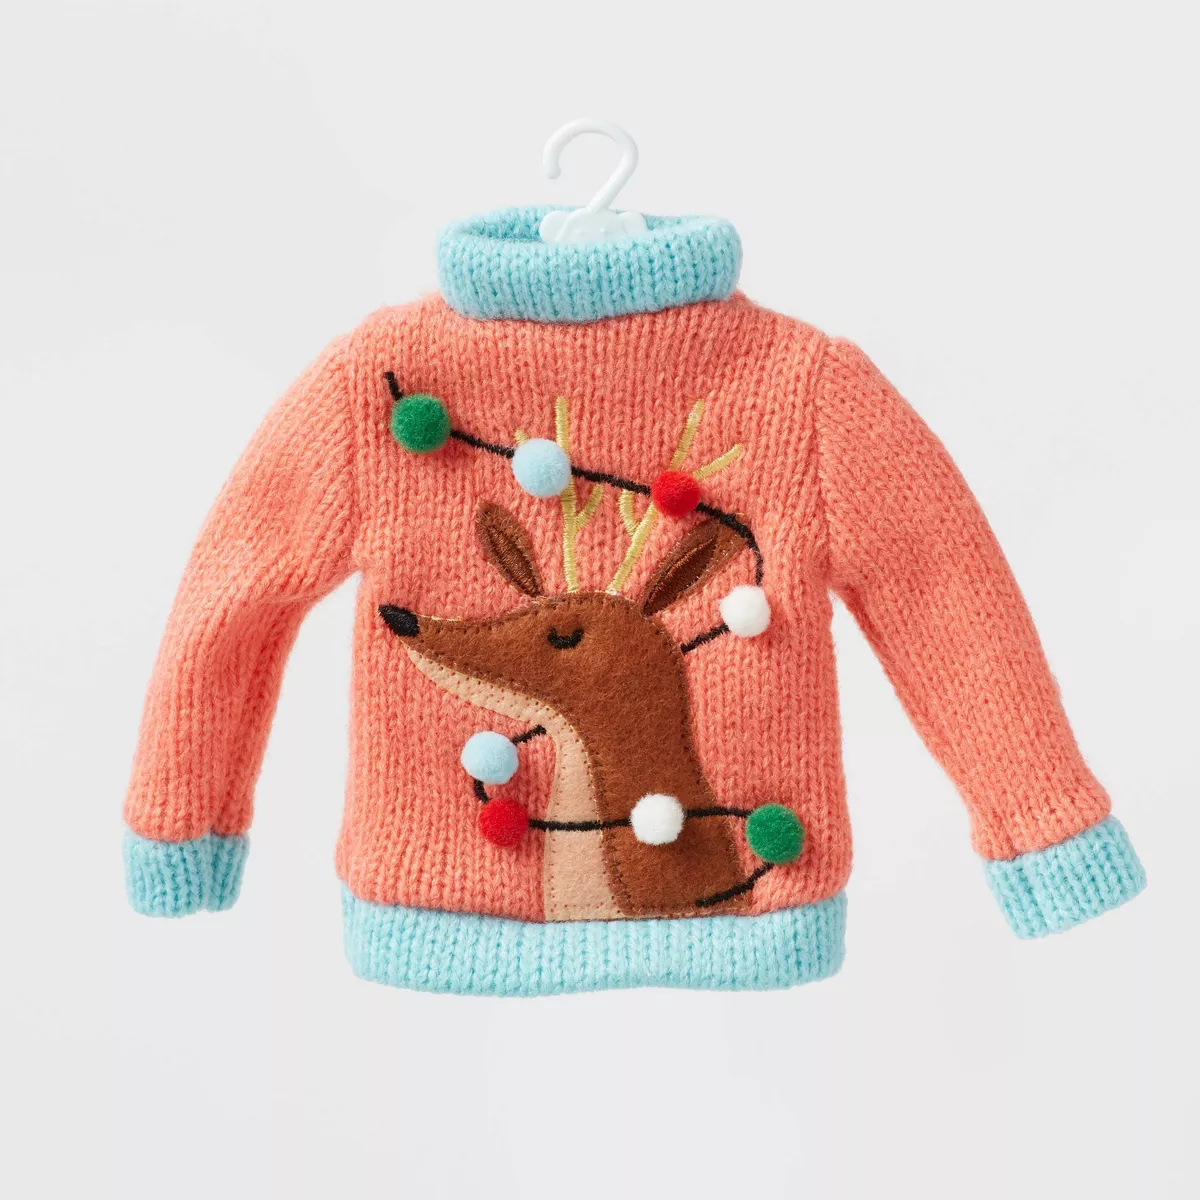 Knit Sweater with Reindeer Christmas Tree Ornament